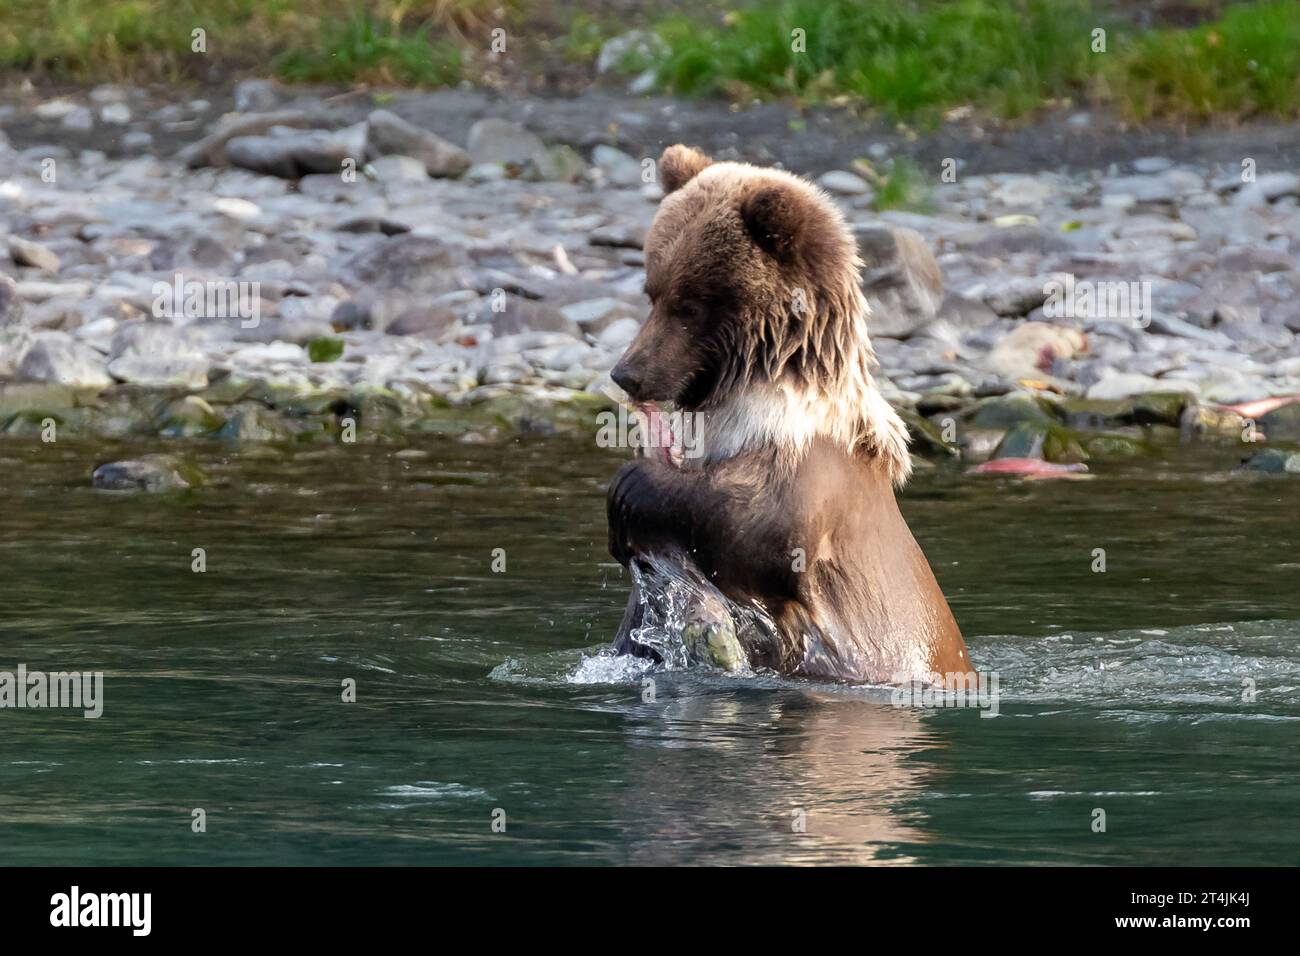 Grizzly bear, Ursus arctos horribilis, standing upright in a river eating a freshly caught salmon Stock Photo